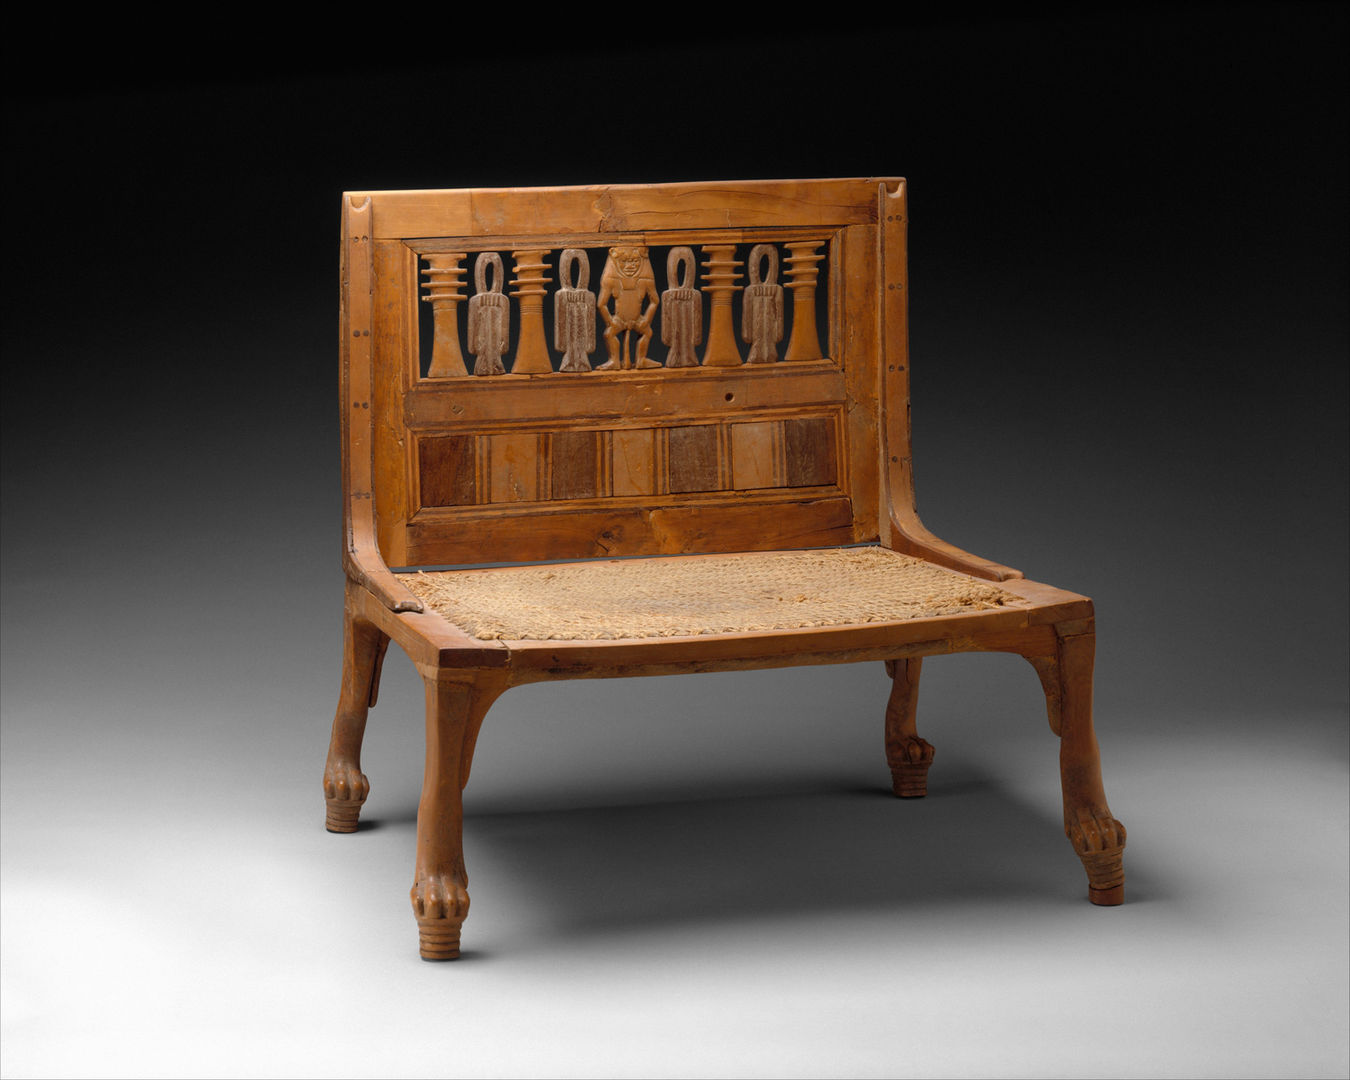 A wide wooden chair with a woven seat and lion-paw legs. The back is decorated with an upright figure with a leonine male and alternating djed pillar and tyet knot amulets.